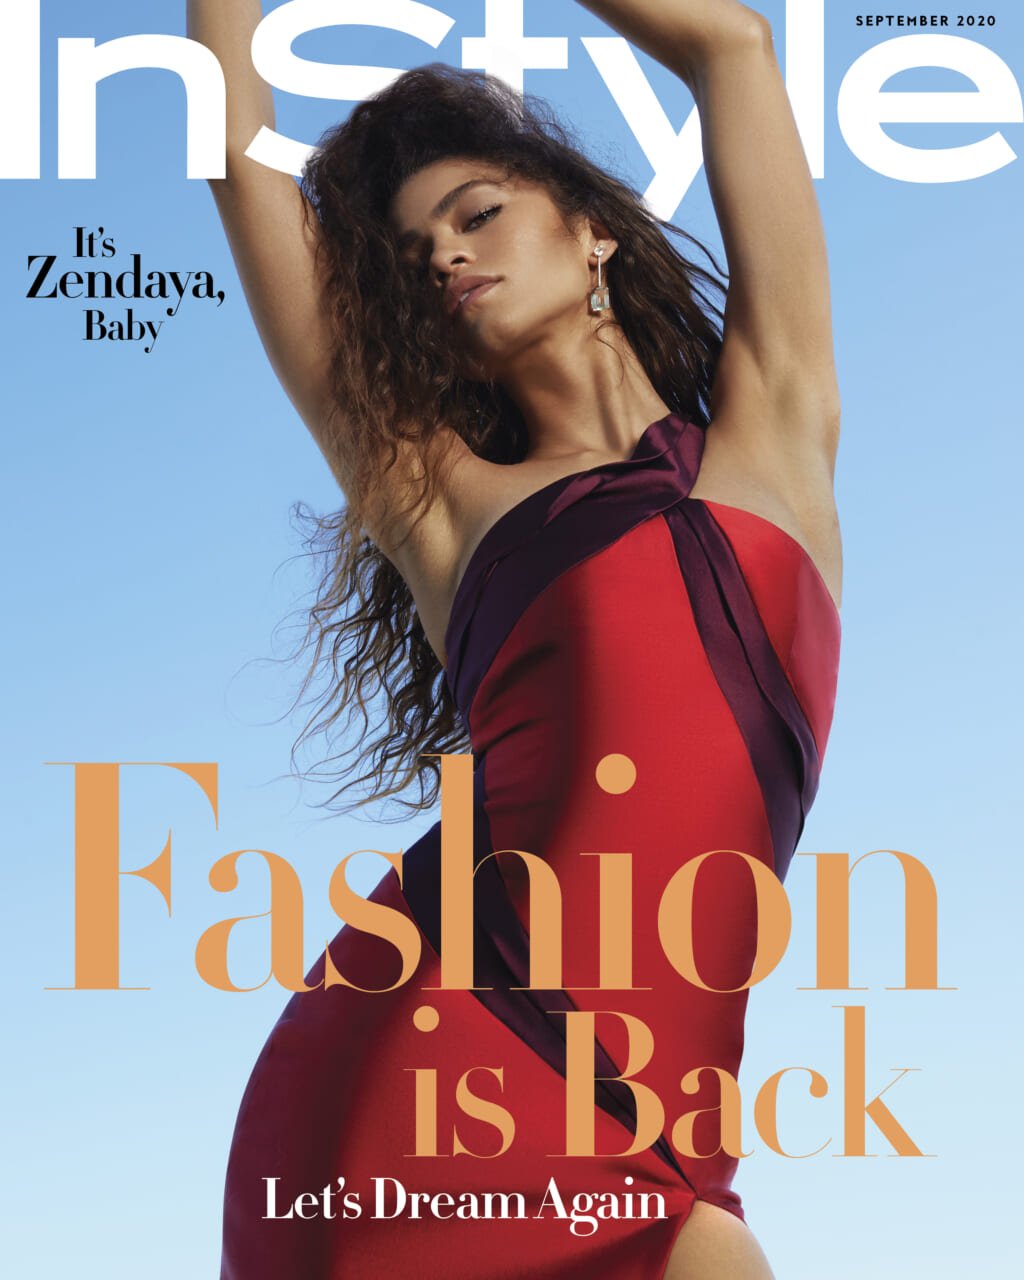 Zendaya, adorned in all Black designers, stuns on InStyle magazine cover